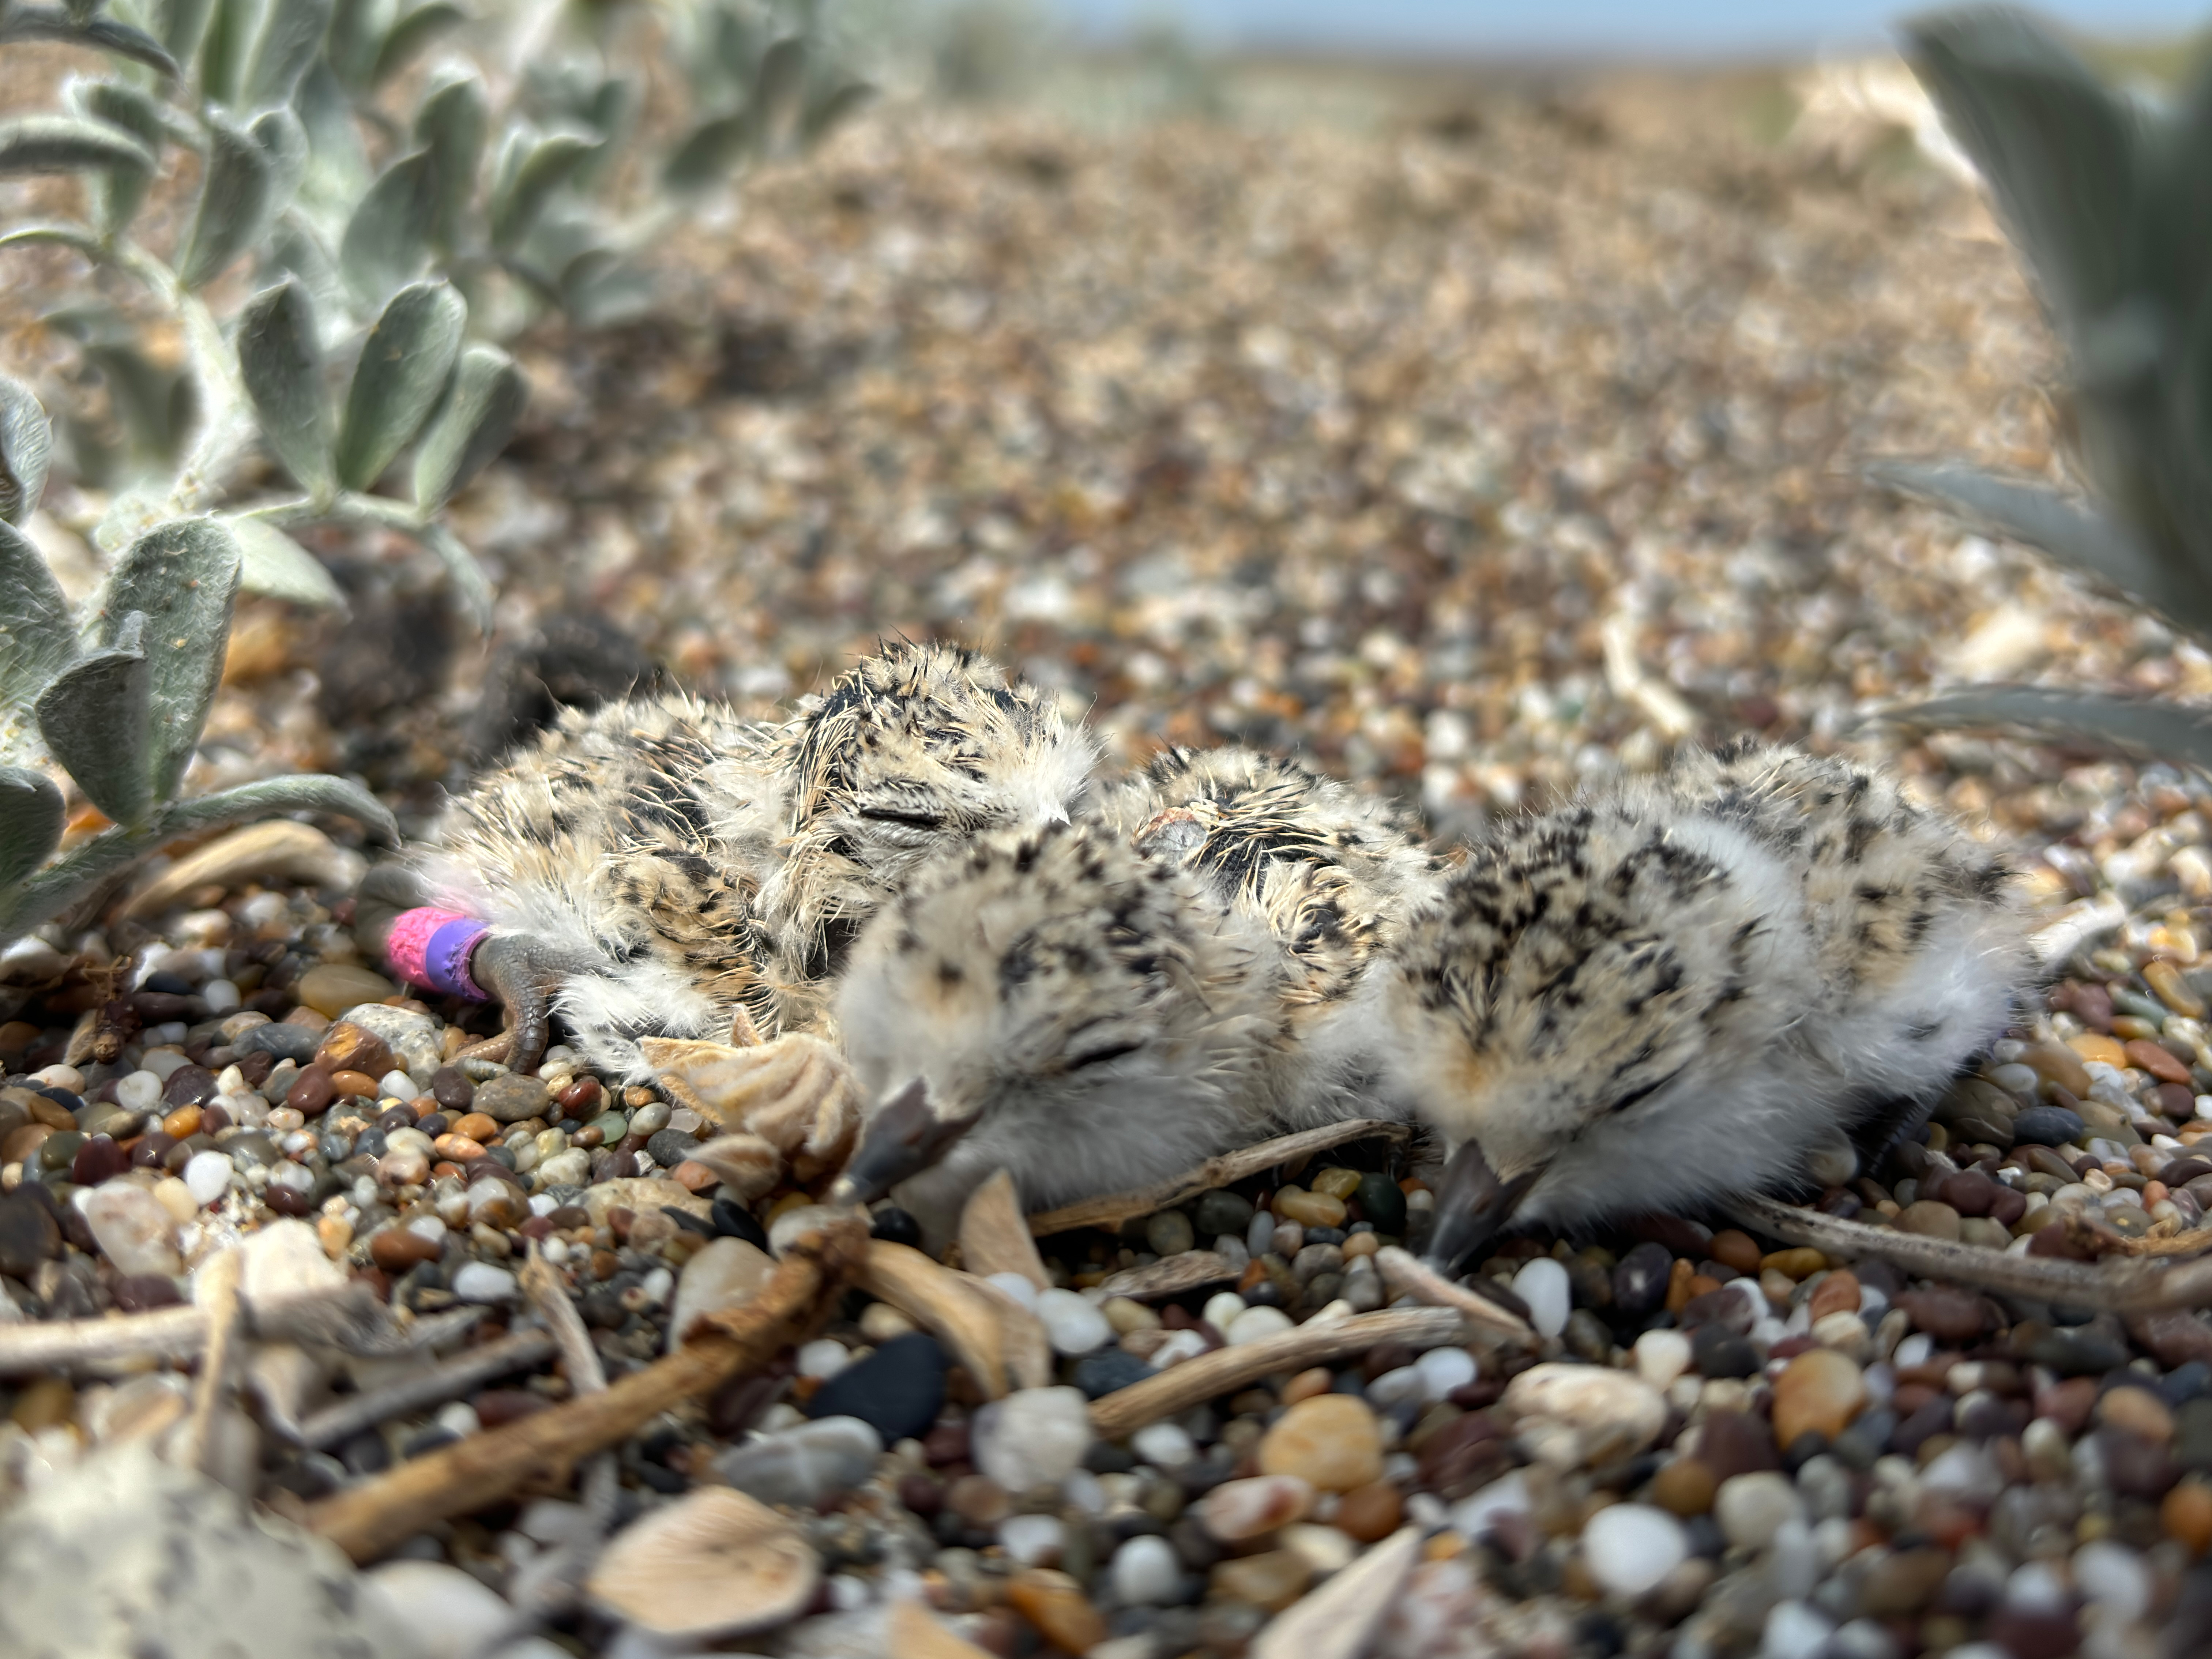 A photo of three small black-speckled, beige-colored, newly-hatched shorebird chicks sitting on sand among small bits of rocks and small grayish-green-leafed plants.